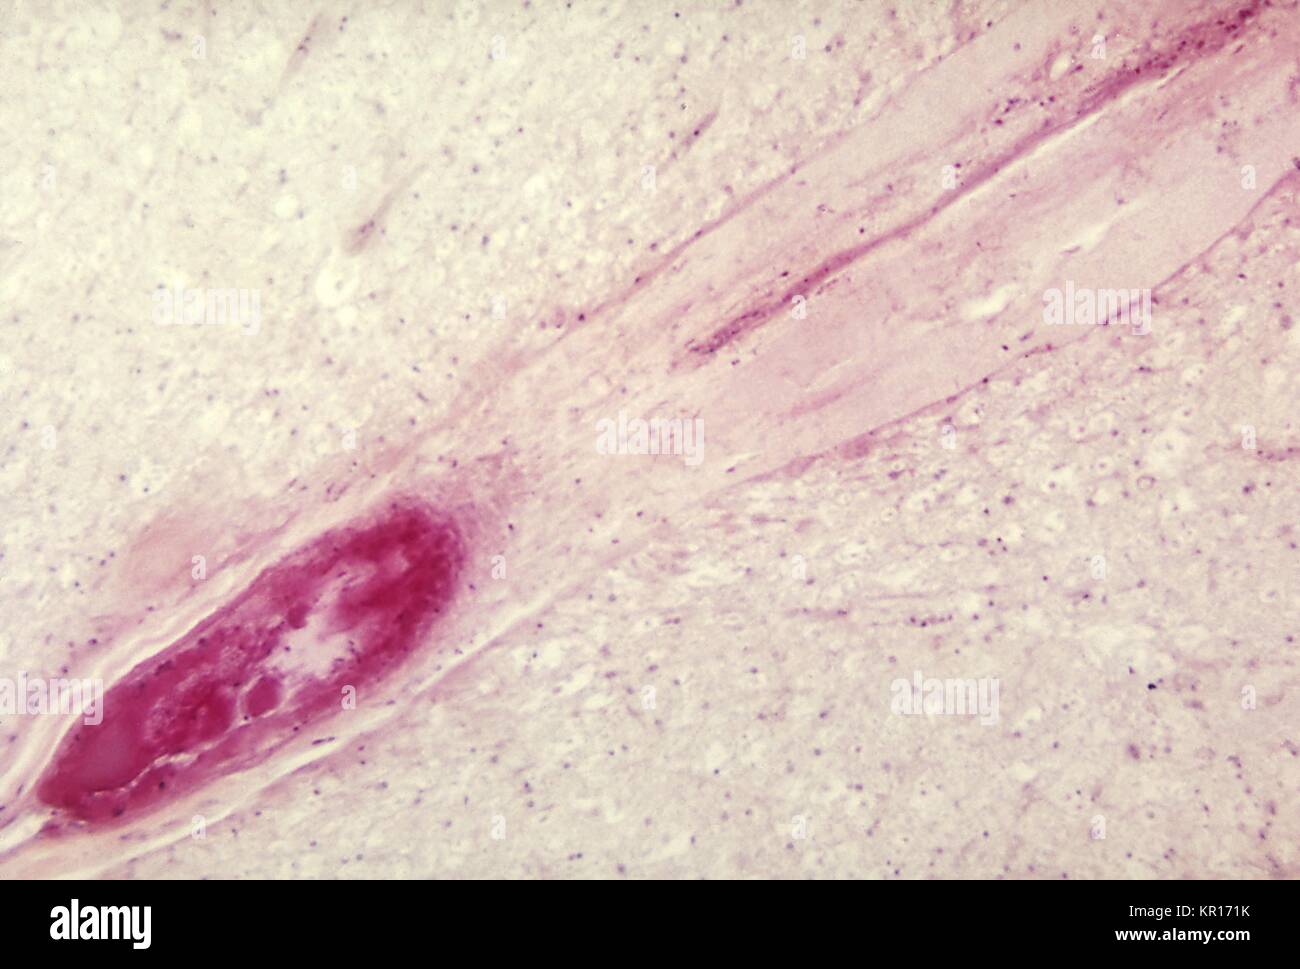 A photomicrograph of the lumbar spinal cord depicting an infarct due to Polio Type III surrounding the anterior spinal artery, 1964. When spinal neurons die, Wallerian degeneration takes place resulting in muscle weakness of those muscles once innervated by the now dead neurons (denervated). The degree of paralysis is directly correlated to the number of deceased neurons. Image courtesy CDC/Dr. Karp, Emory University. Stock Photo